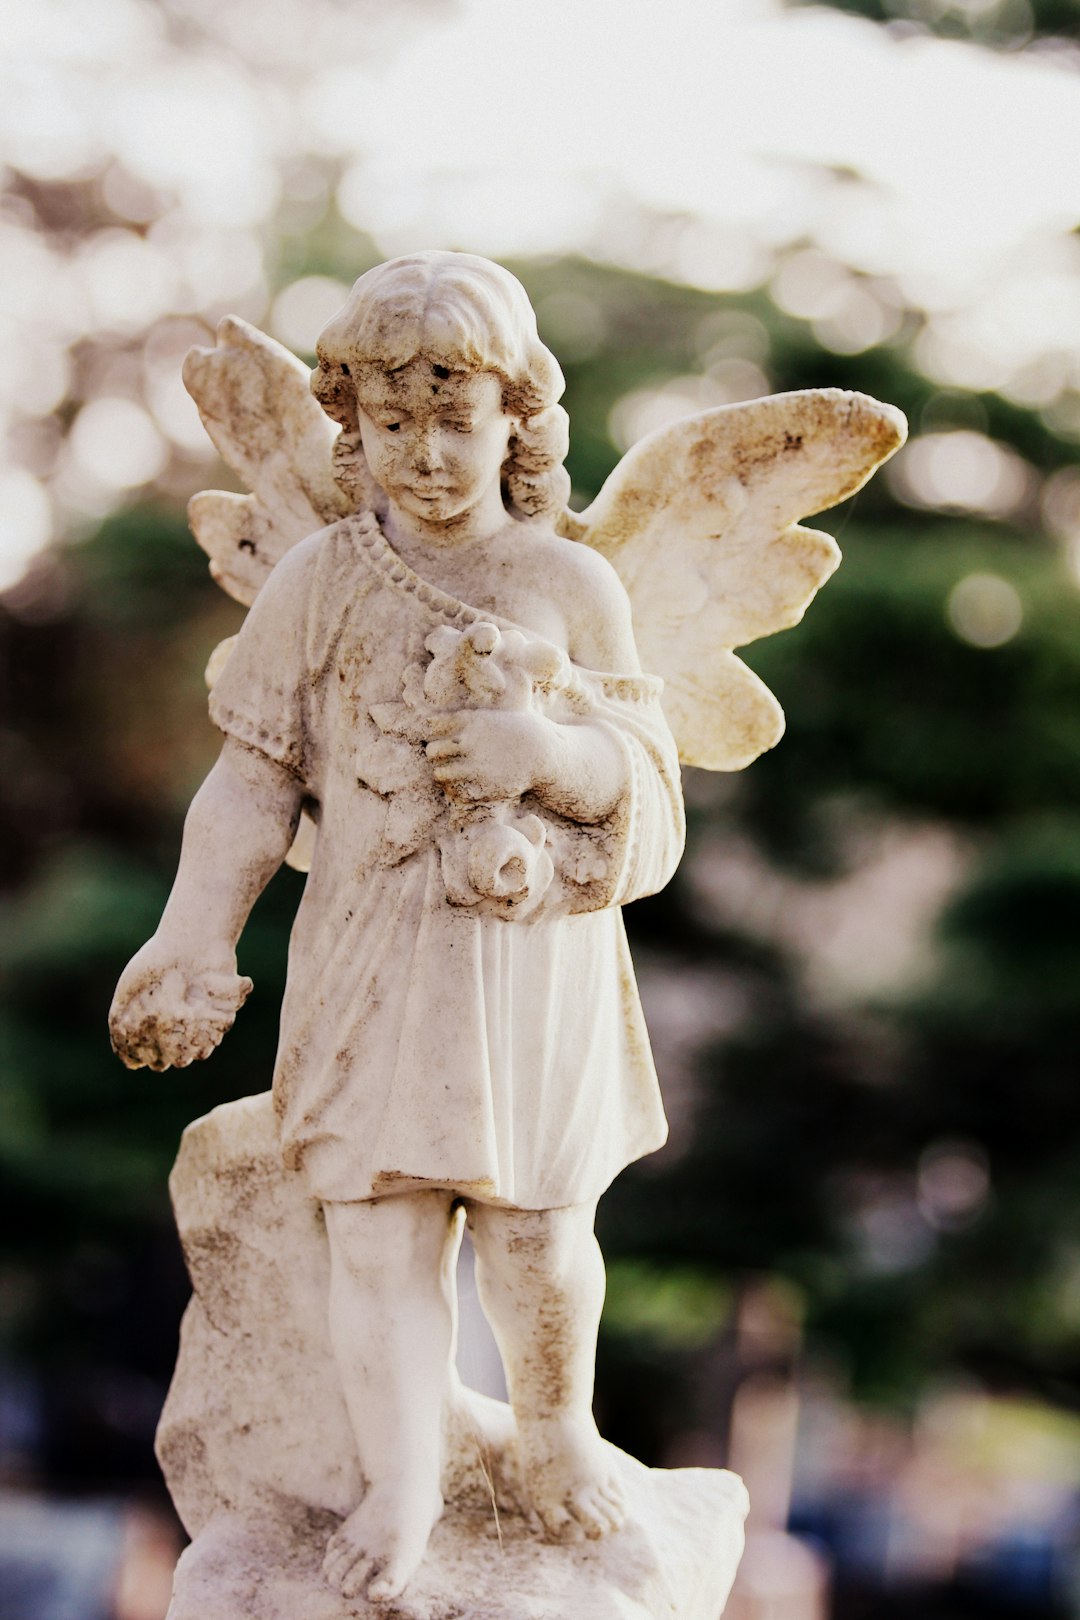 The beautiful park-like grounds of Purewa have thousands of graves, some well maintained, others long forgotten. This angel clasps a treasure next to her body.